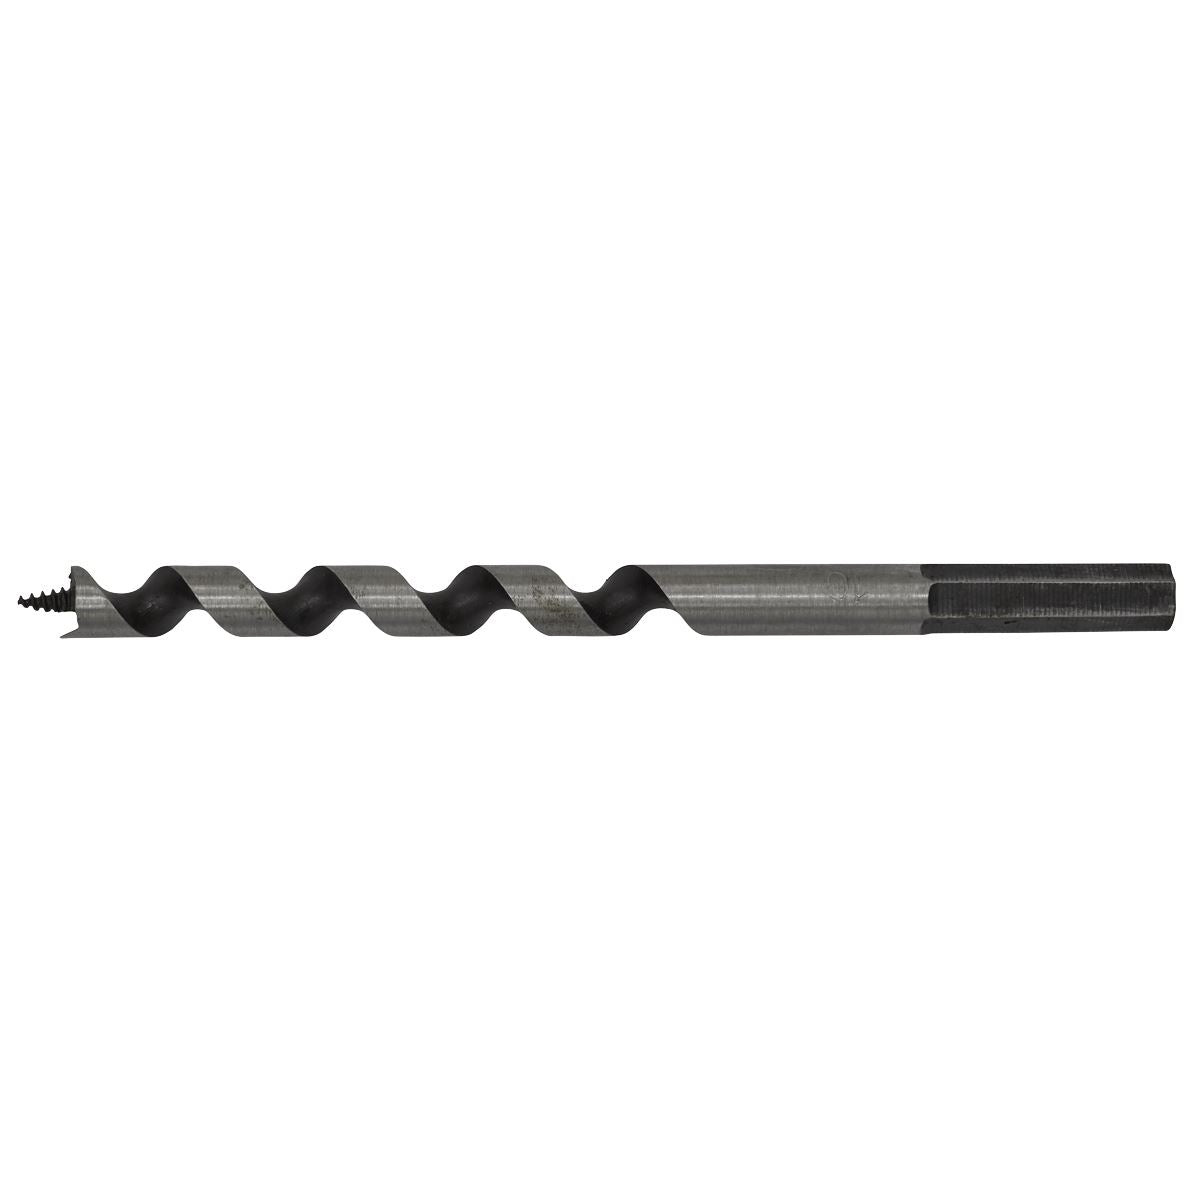 Worksafe by Sealey Auger Wood Drill Bit 10mm x 155mm